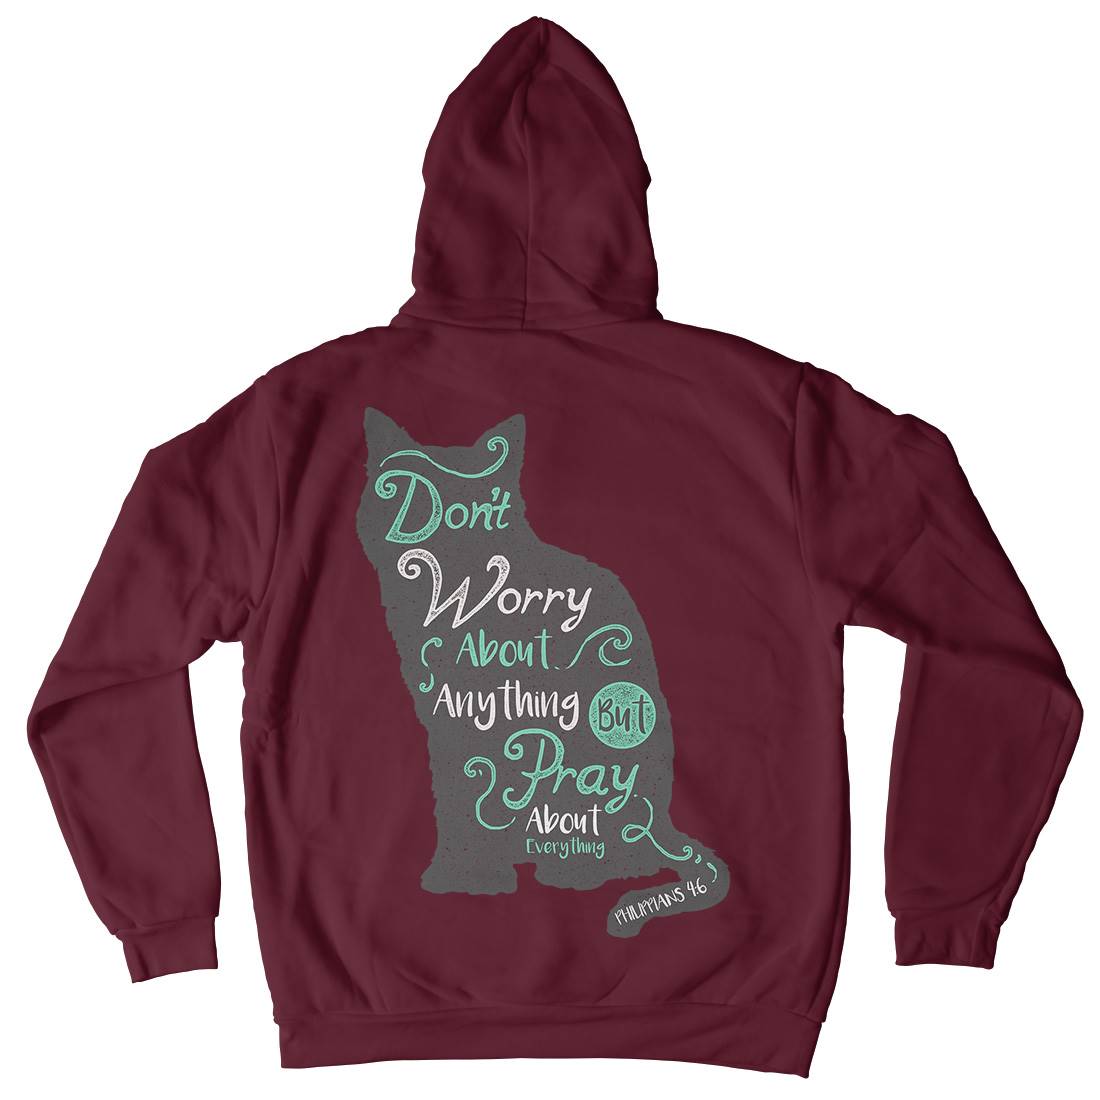 Pray For Everything Mens Hoodie With Pocket Religion A360